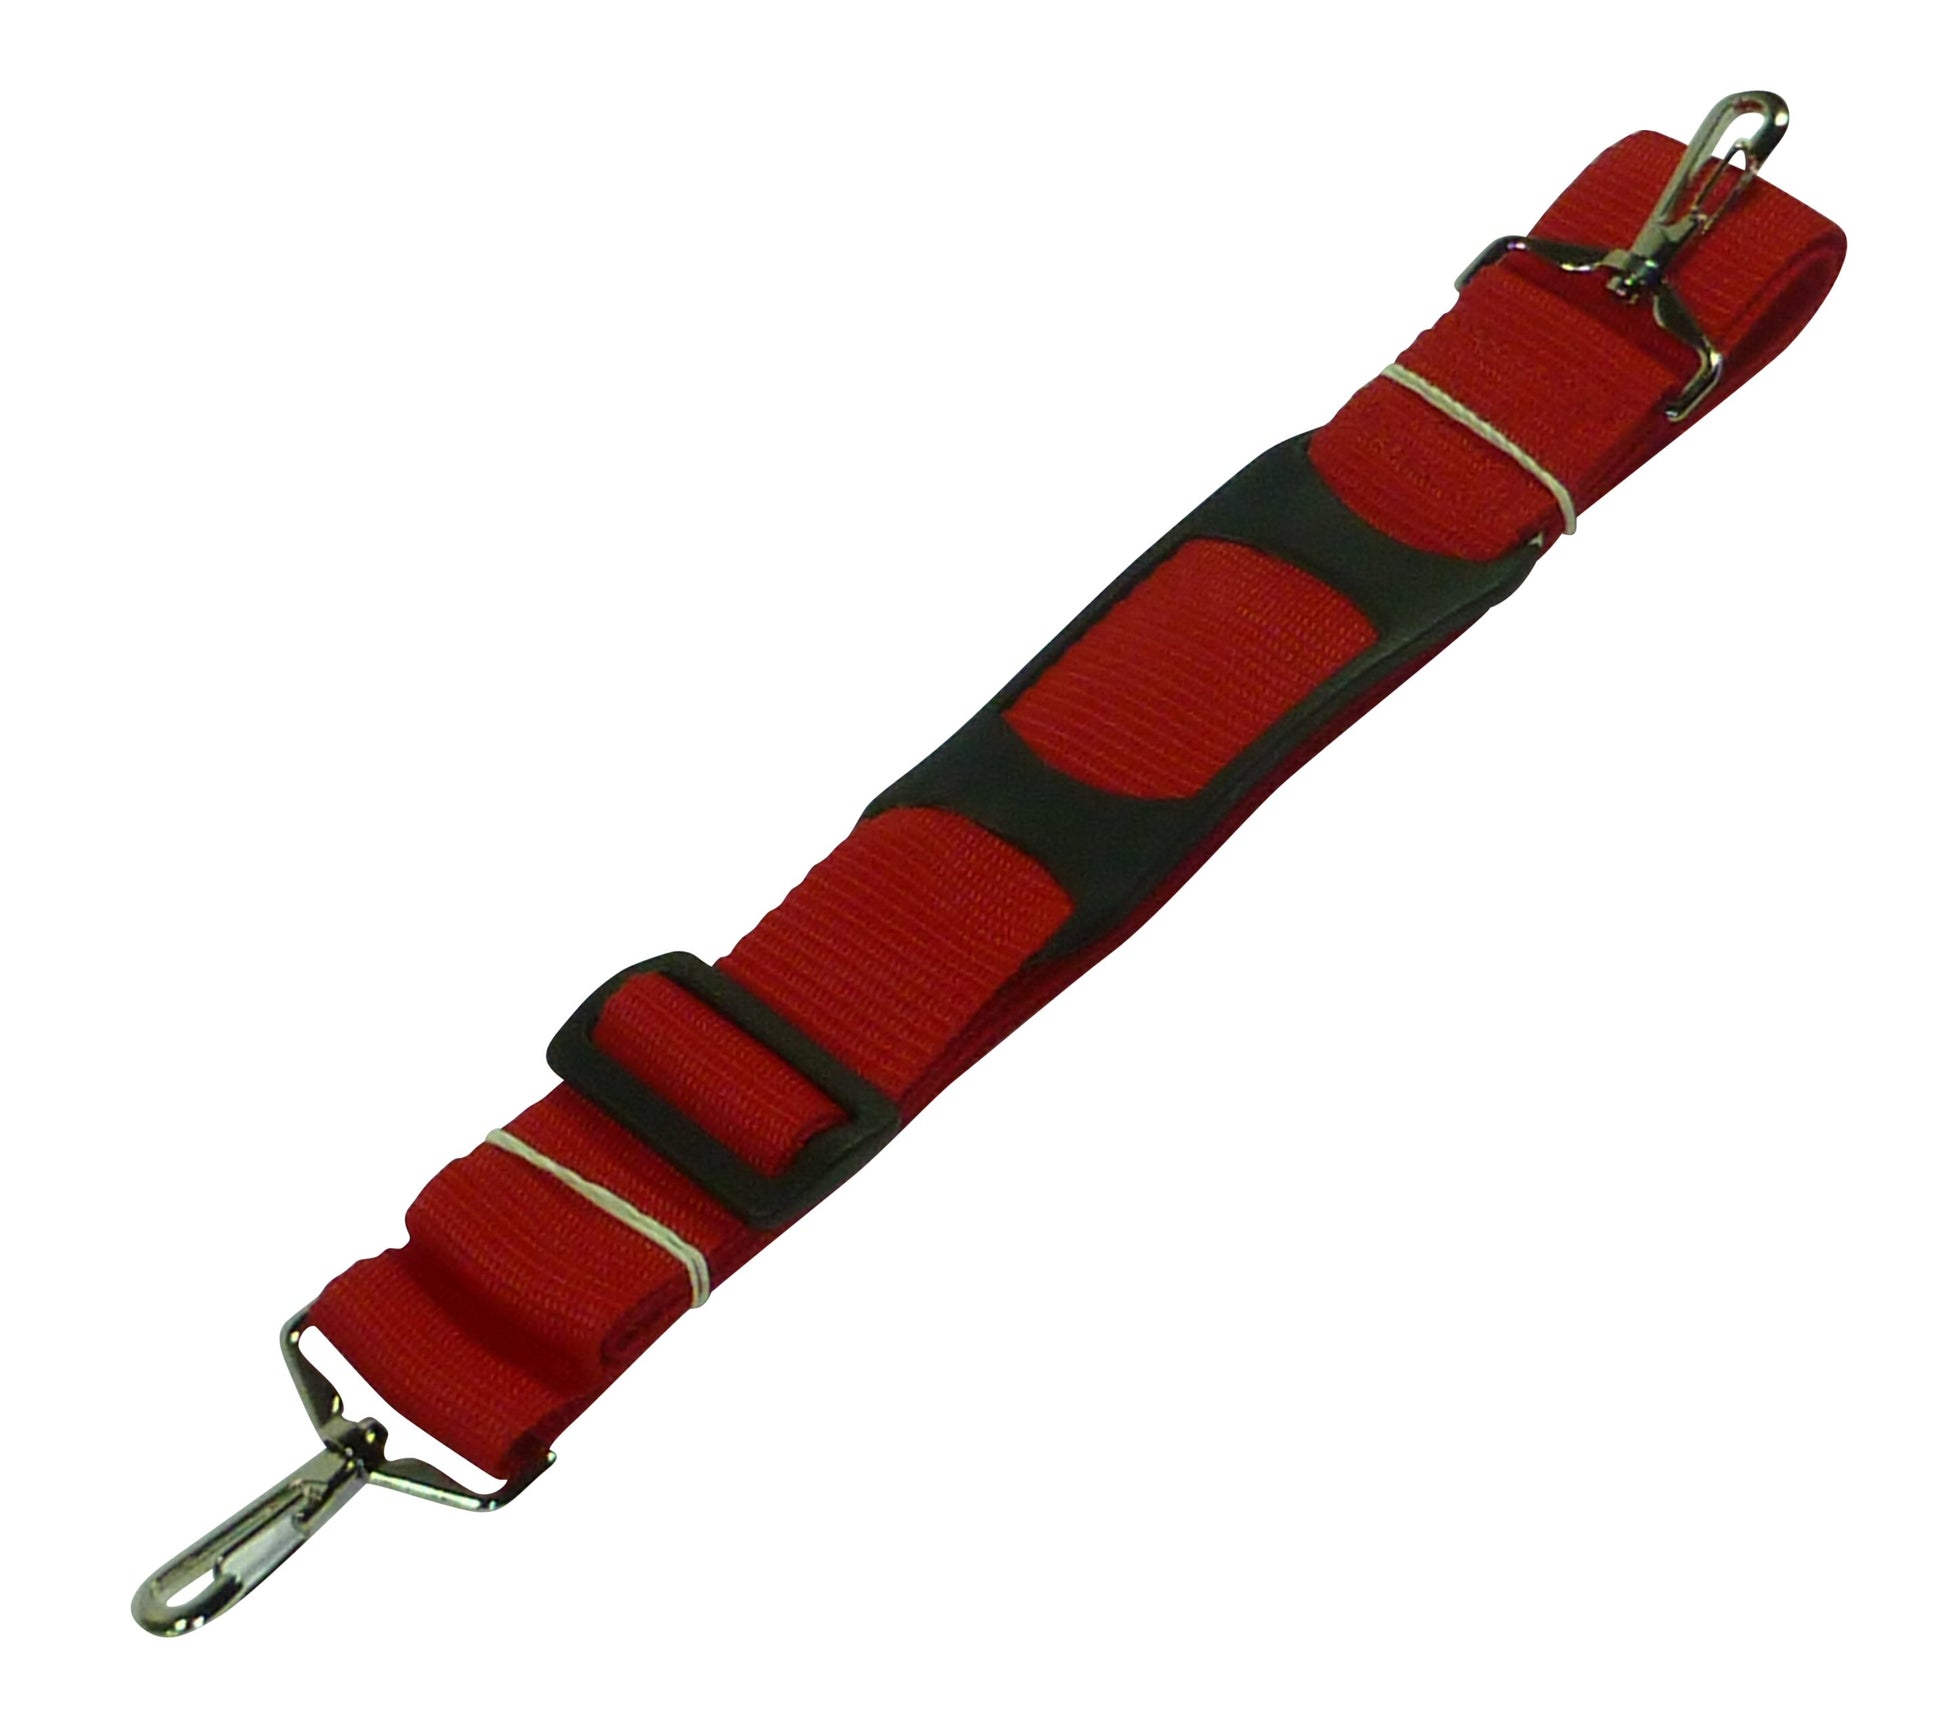 38mm Bag Strap with Metal Buckles and Shoulder Pad, 150cm in red